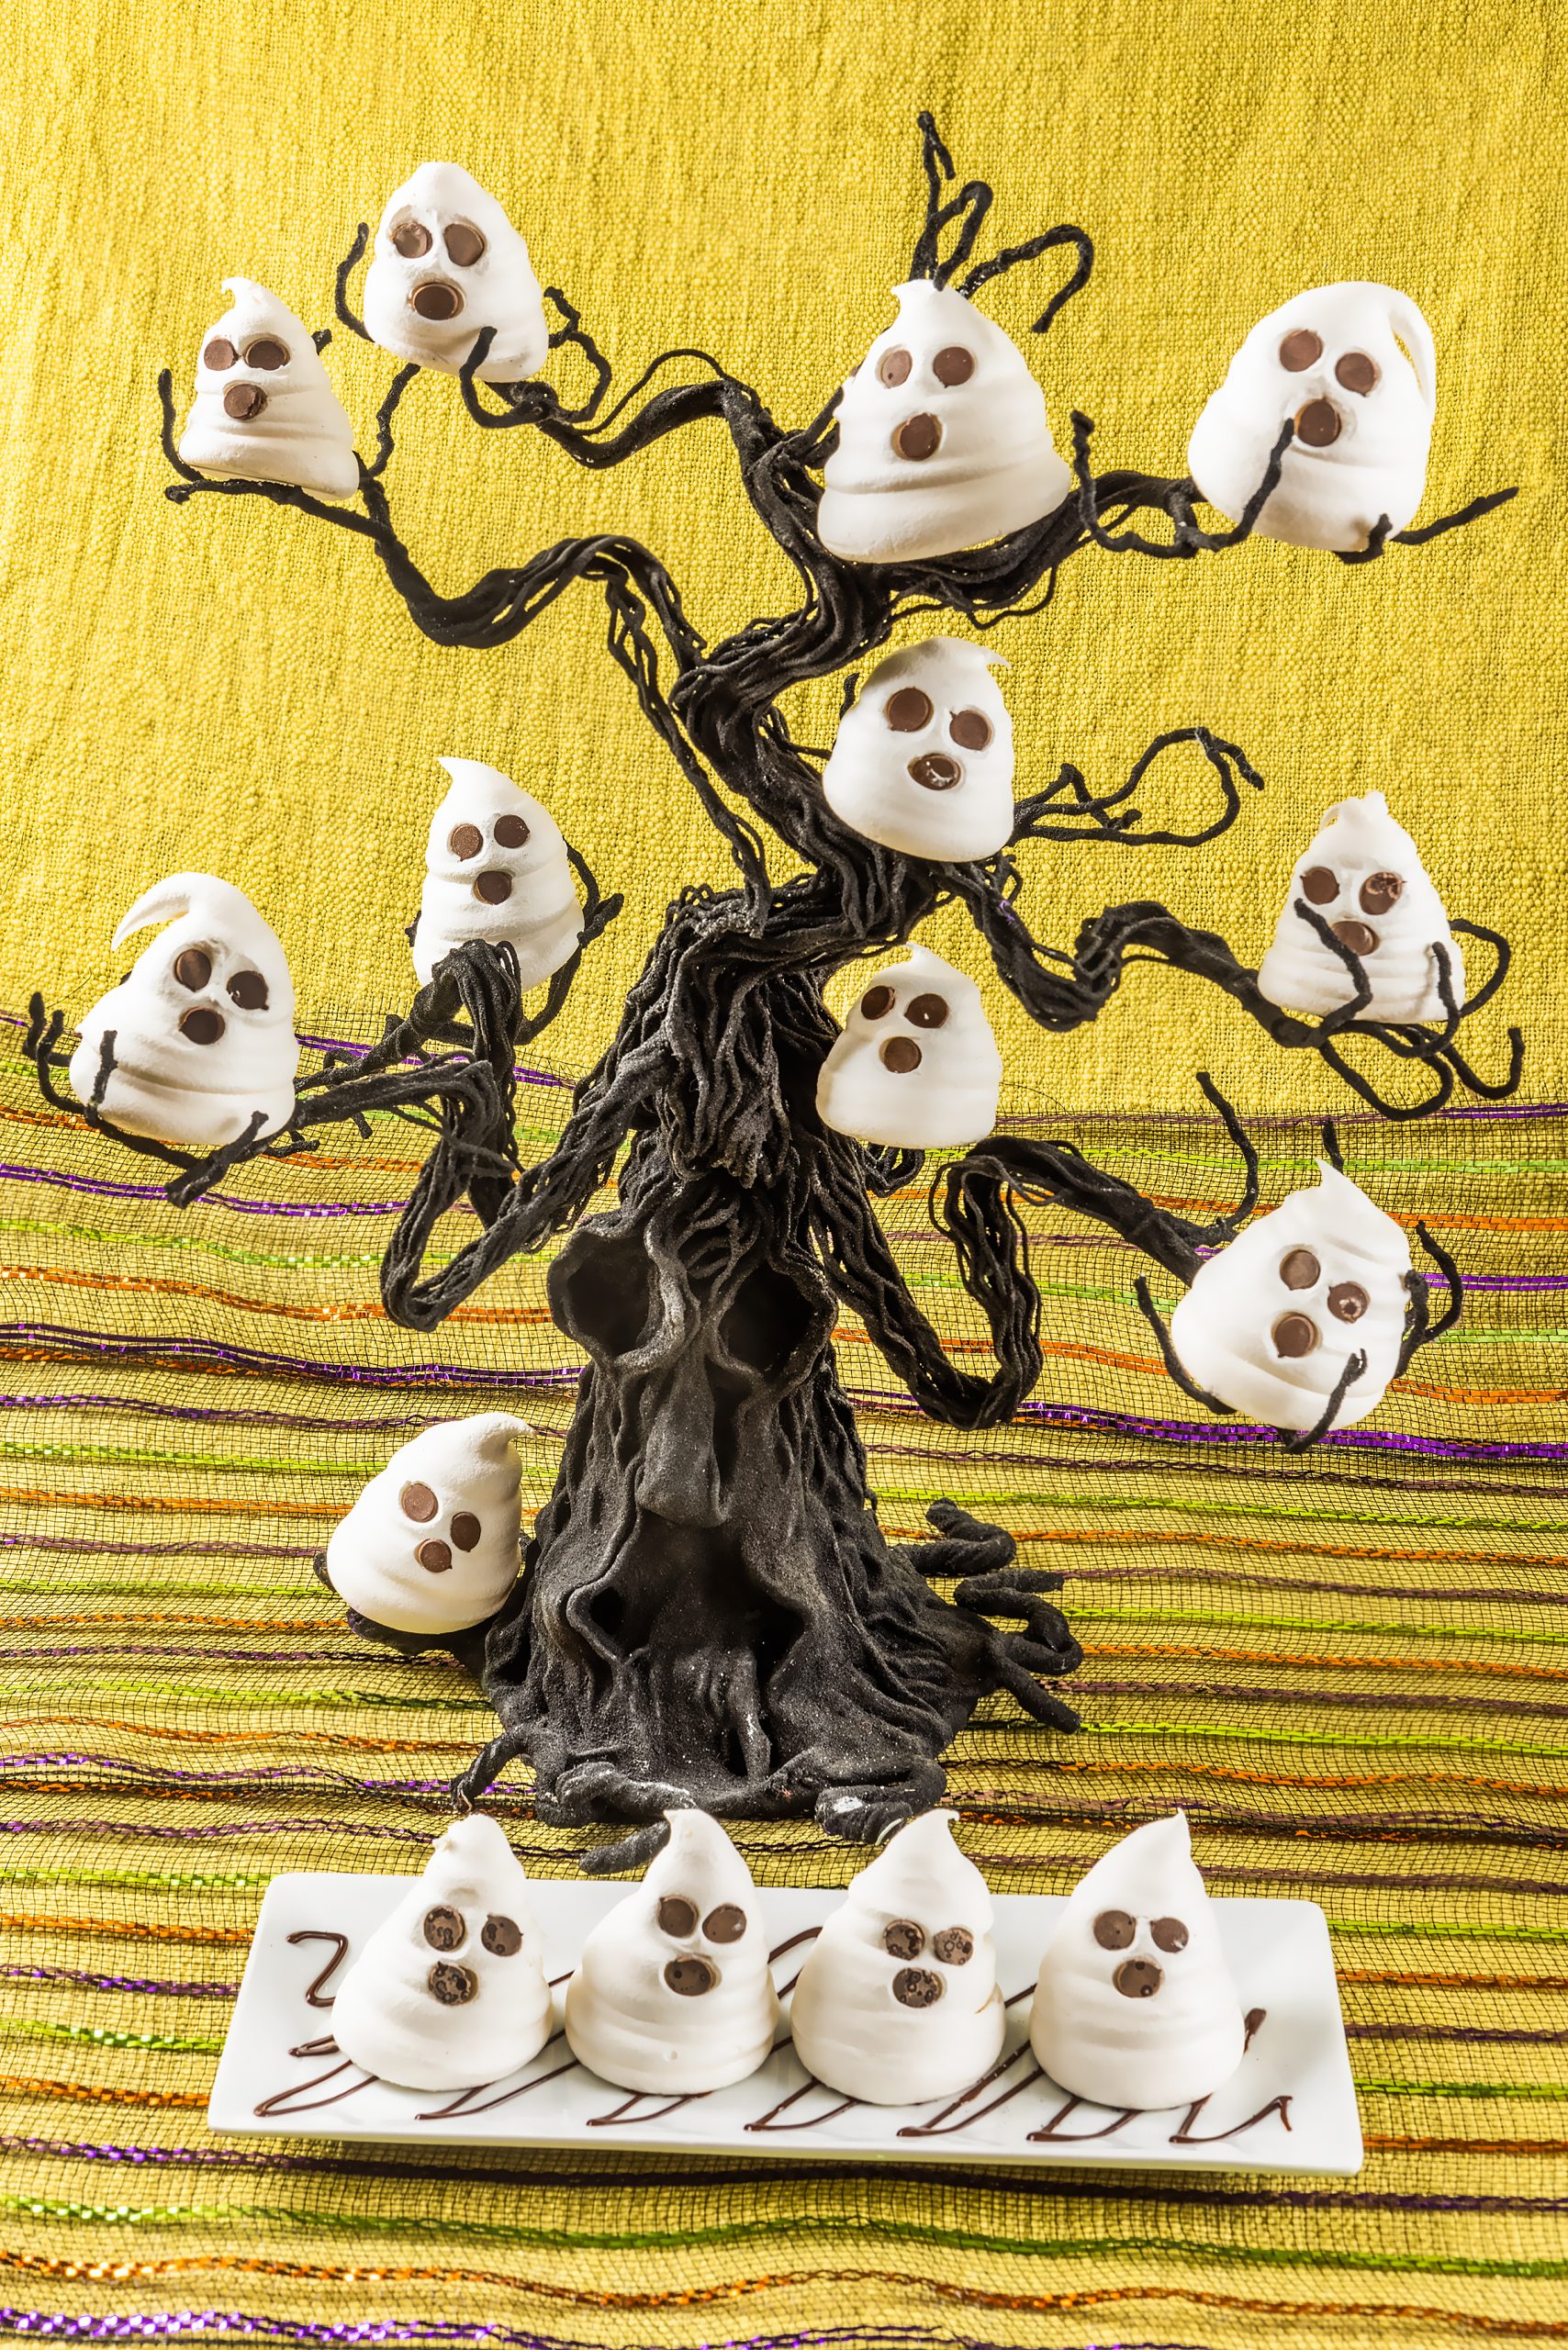 Finish your smashing Halloween dinner with frightfully delicious meringue ghosts. Creative Co-op tablecloth courtesy of Kudzu Bakery & Market.